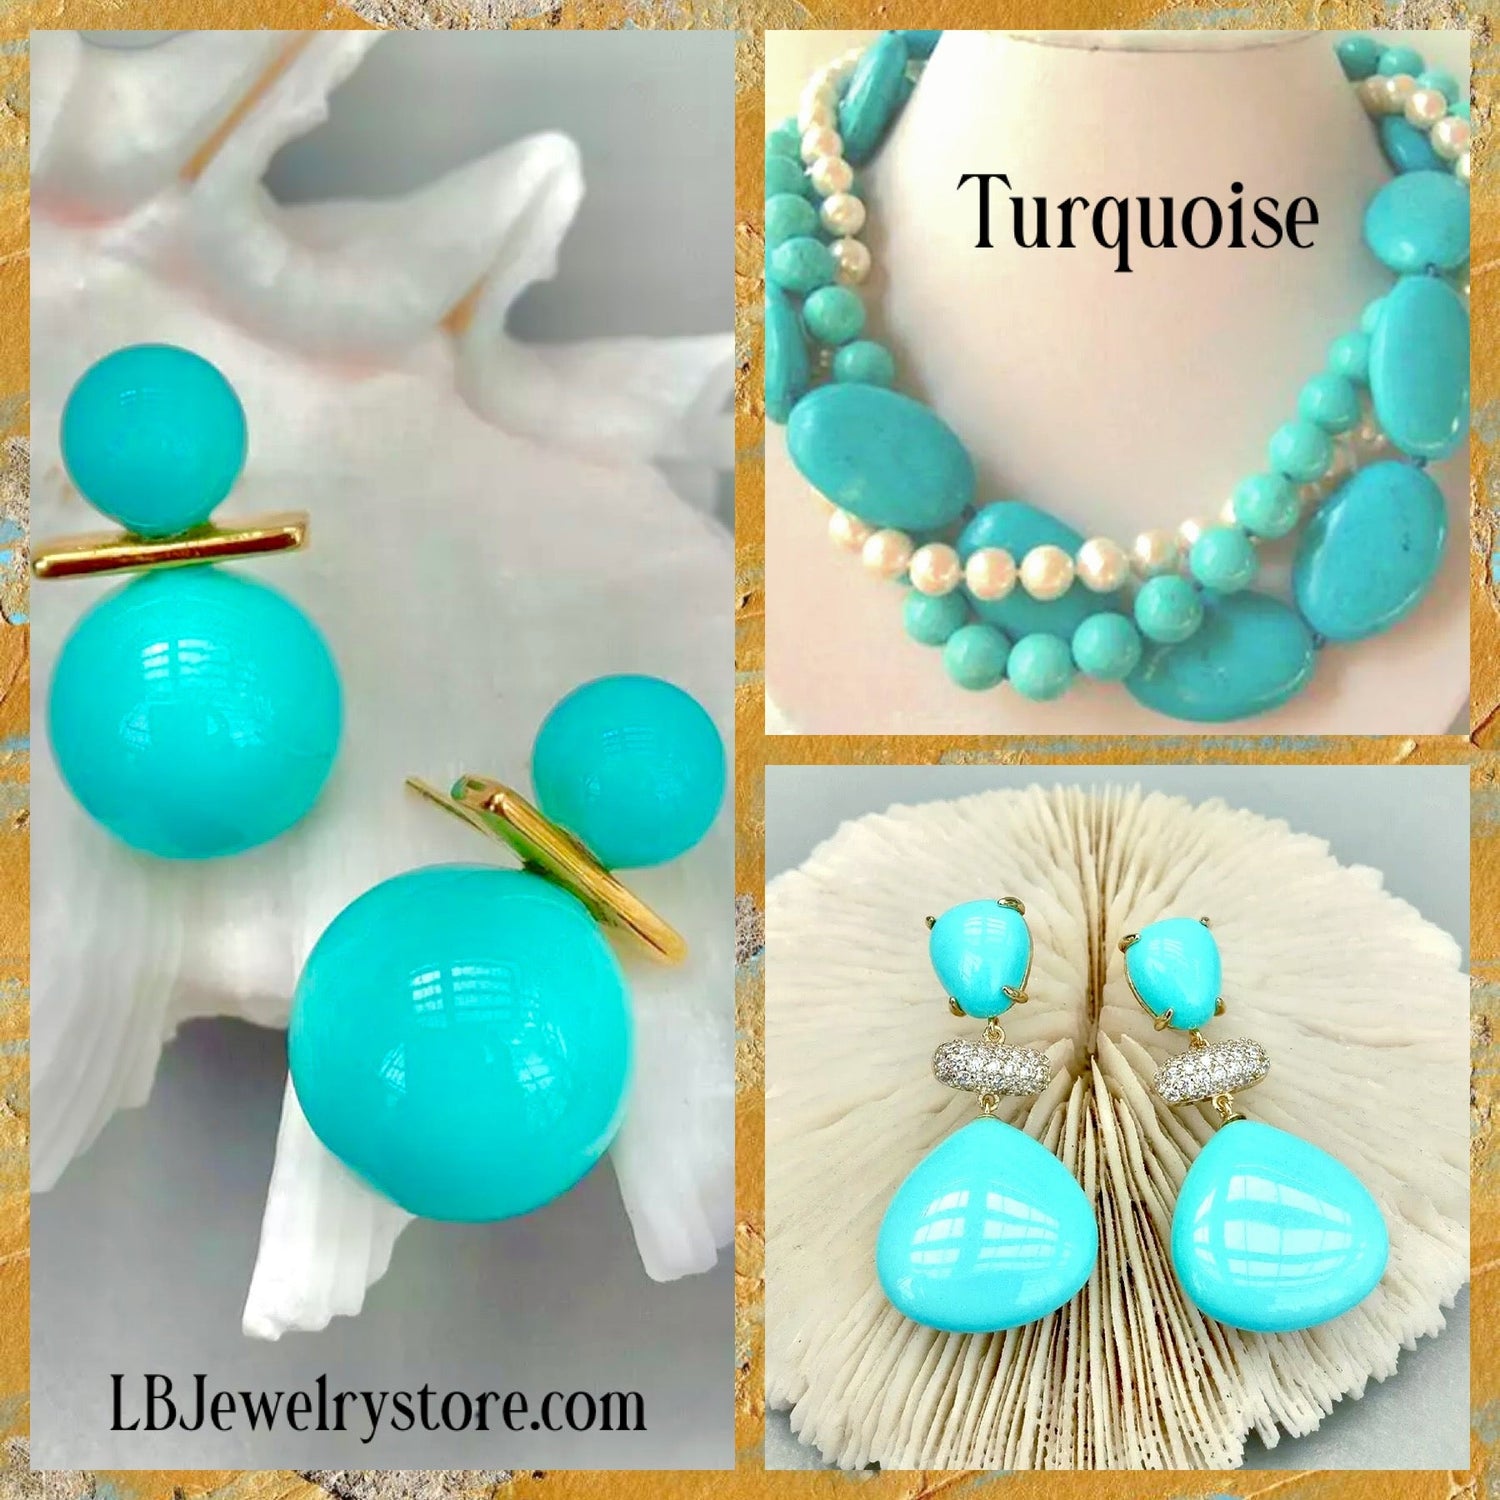 Gold Turquoise Jewelry Dallas. Colors vary from sky blue, greenish blue, or pale green depending on the quantities of copper within it. Richer color types are the most appreciated. The most preferred color is a strong sky blue.